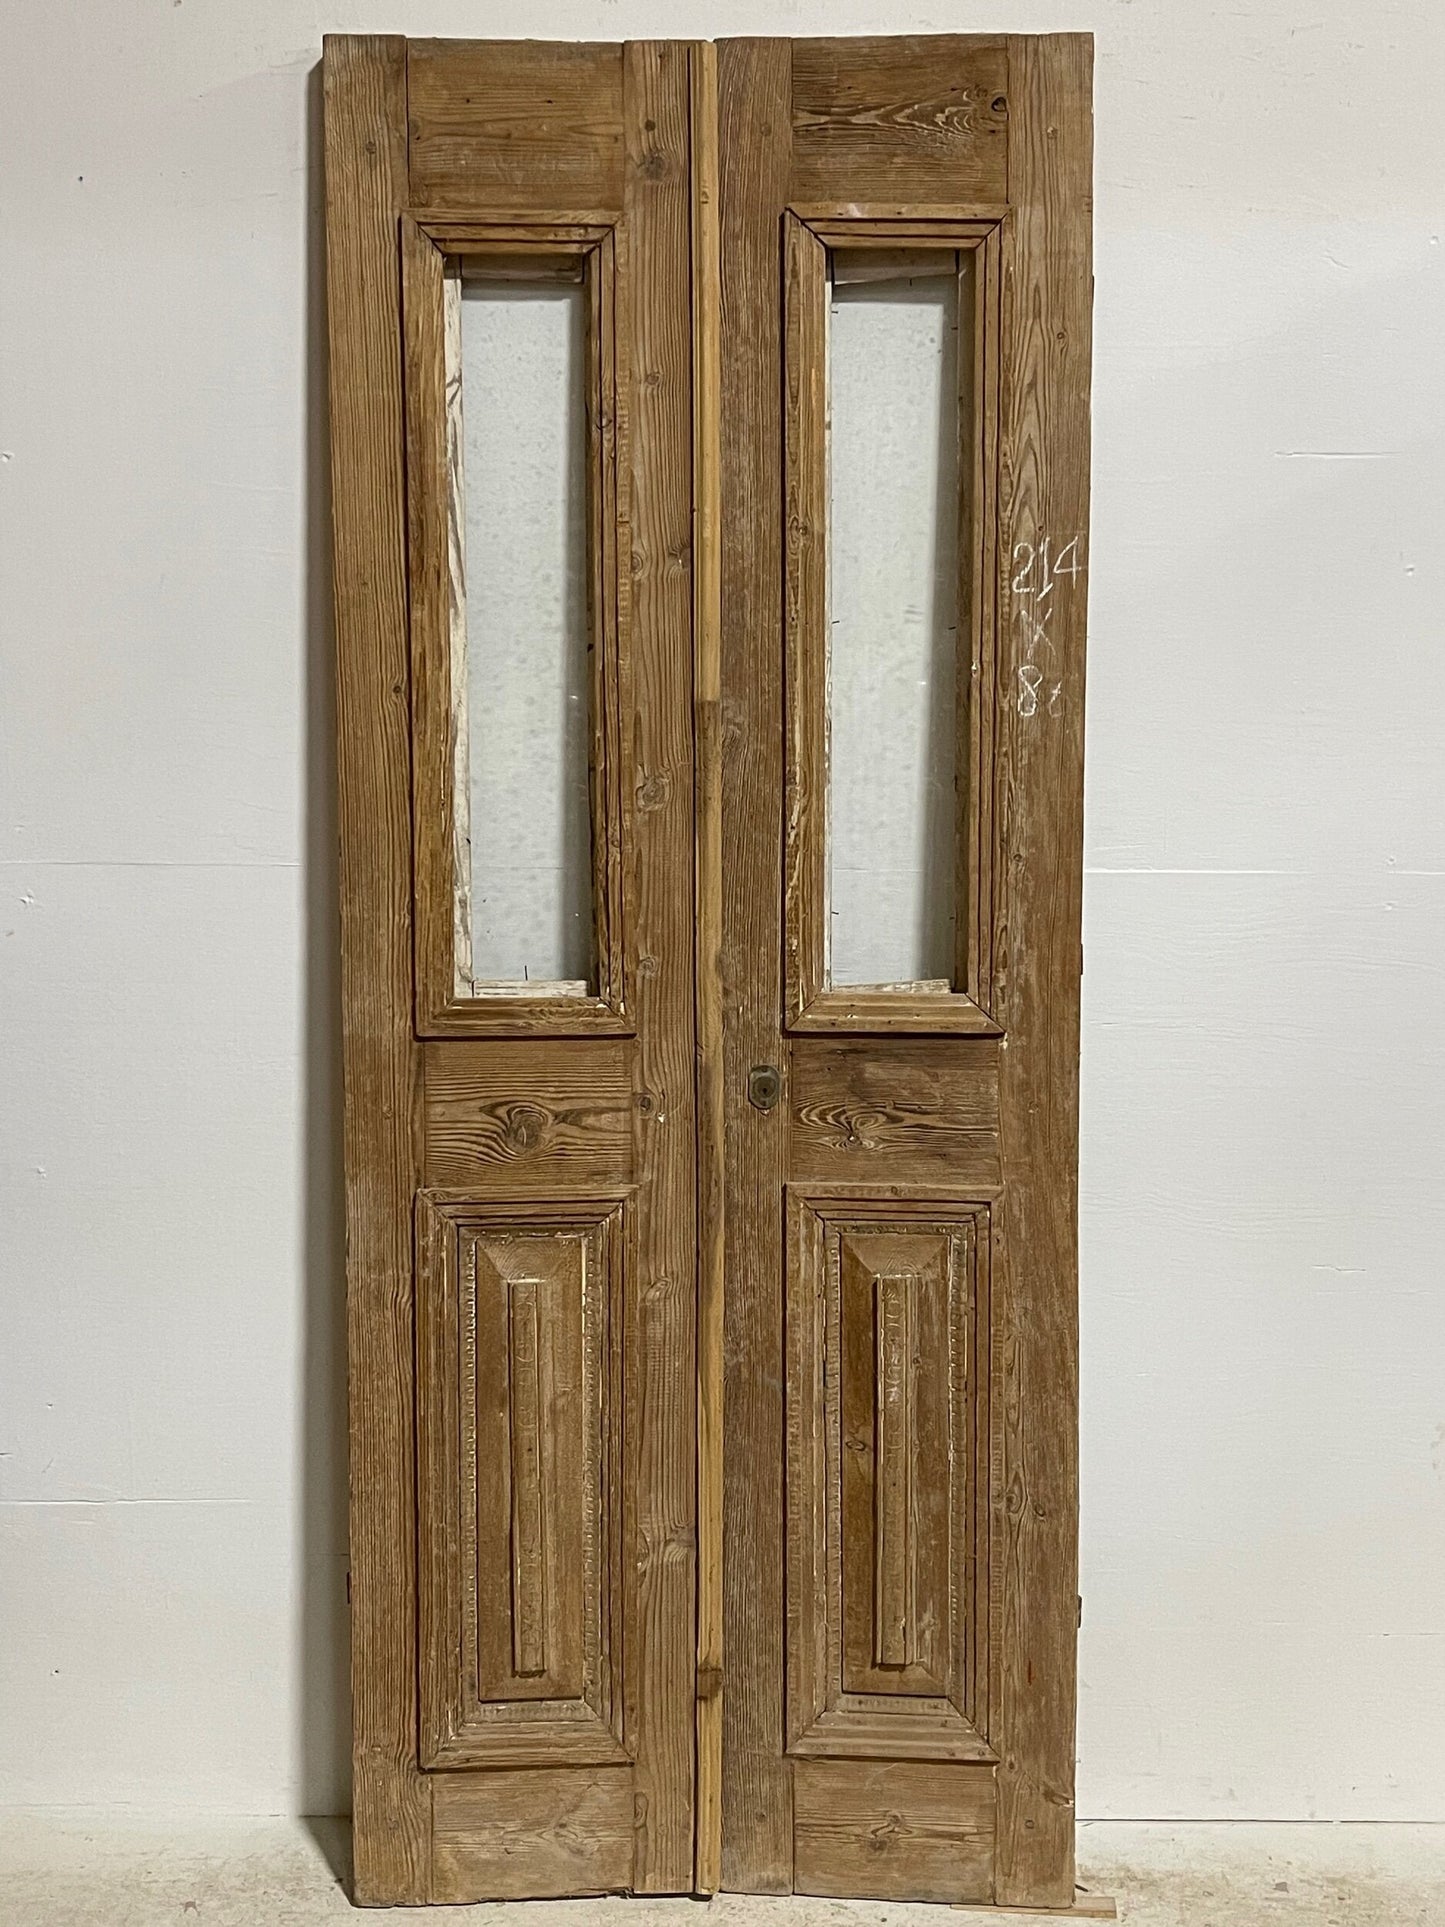 Antique French doors with glass (84.25x33.5) H0105s